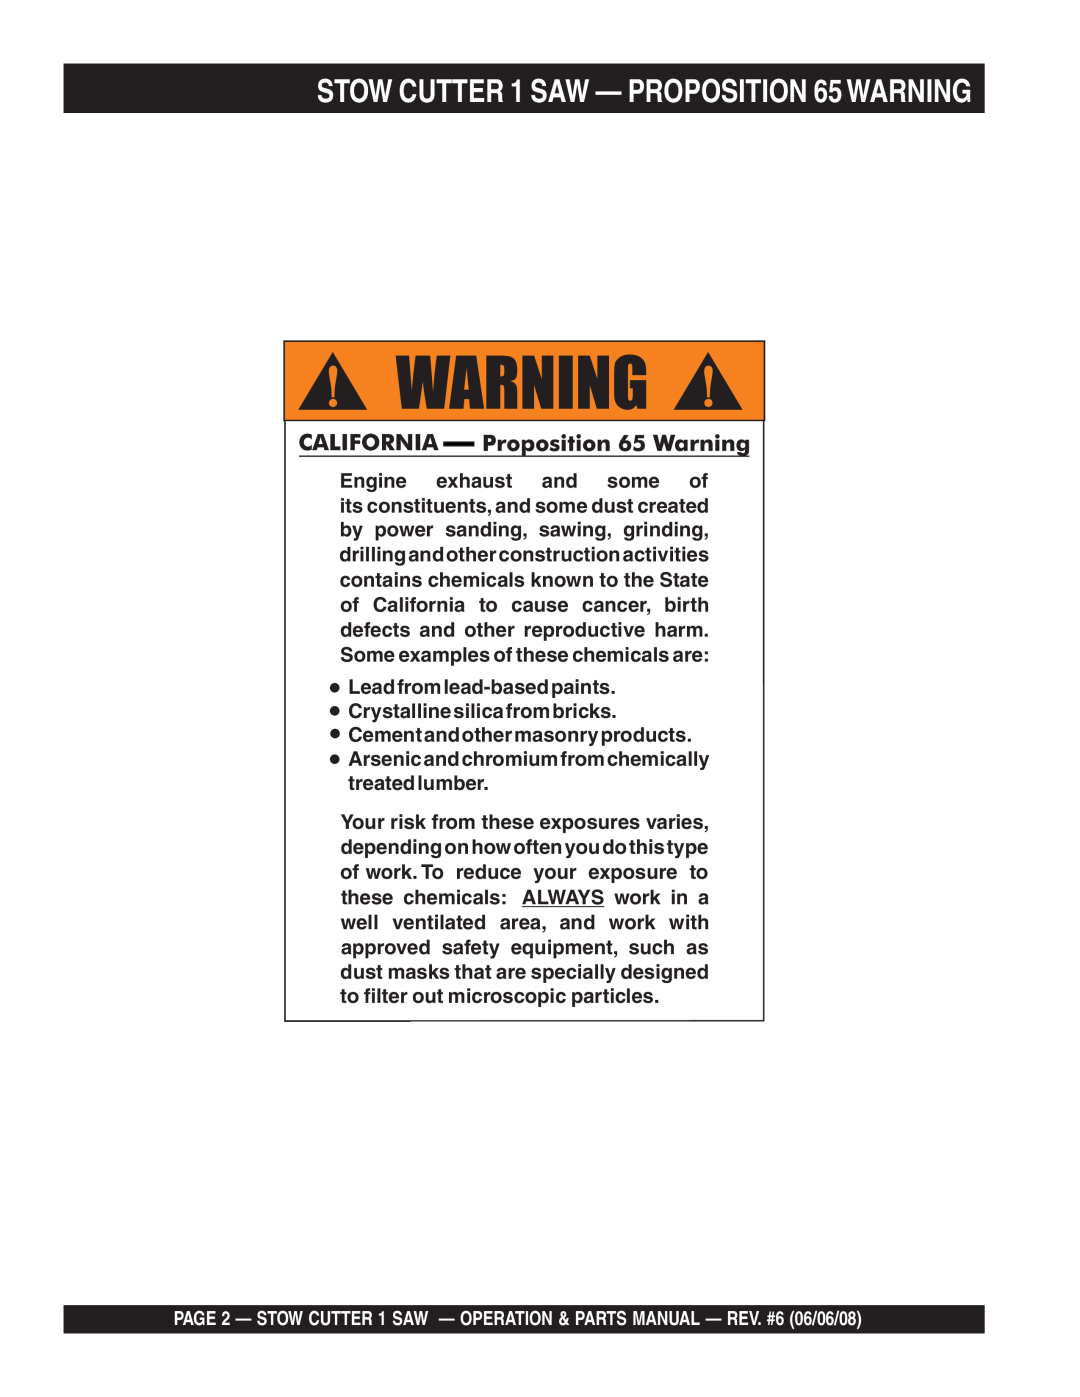 Multiquip CD605E16 (5 HP Electric Motor) manual STOW CUTTER 1 SAW - PROPOSITION 65 WARNING 